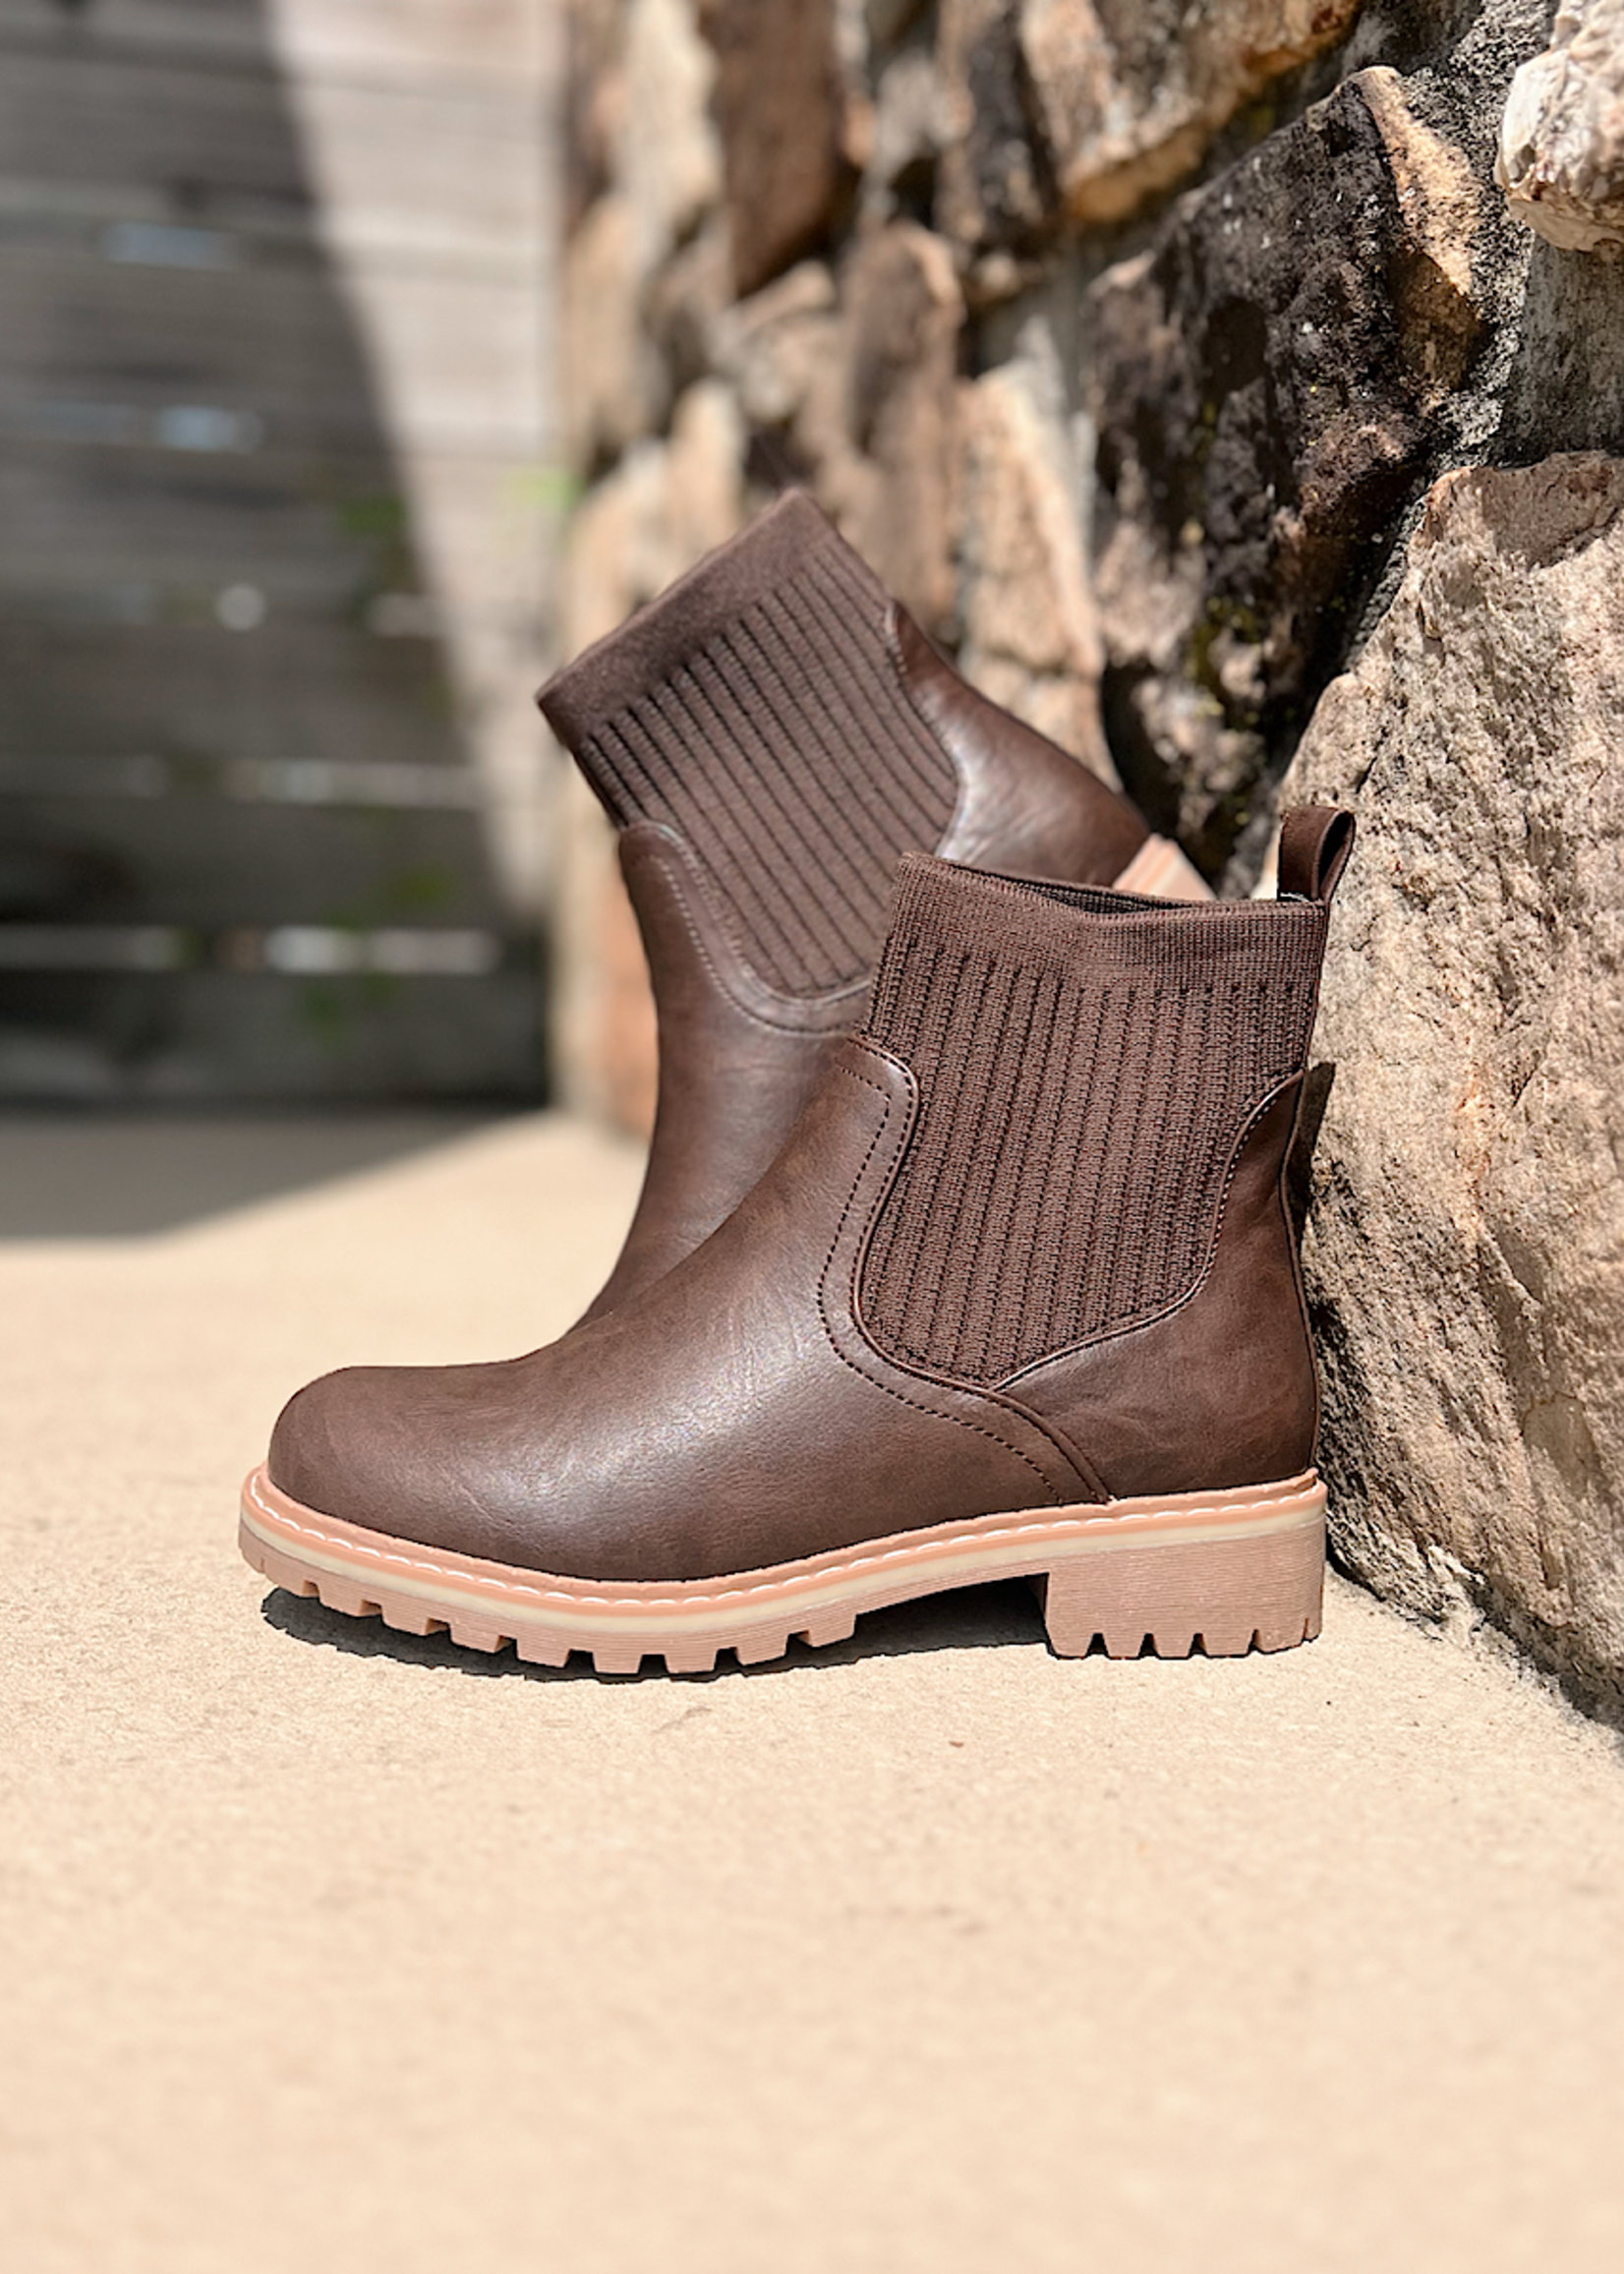 Corkys Corky's Cabin Fever Brown Boots